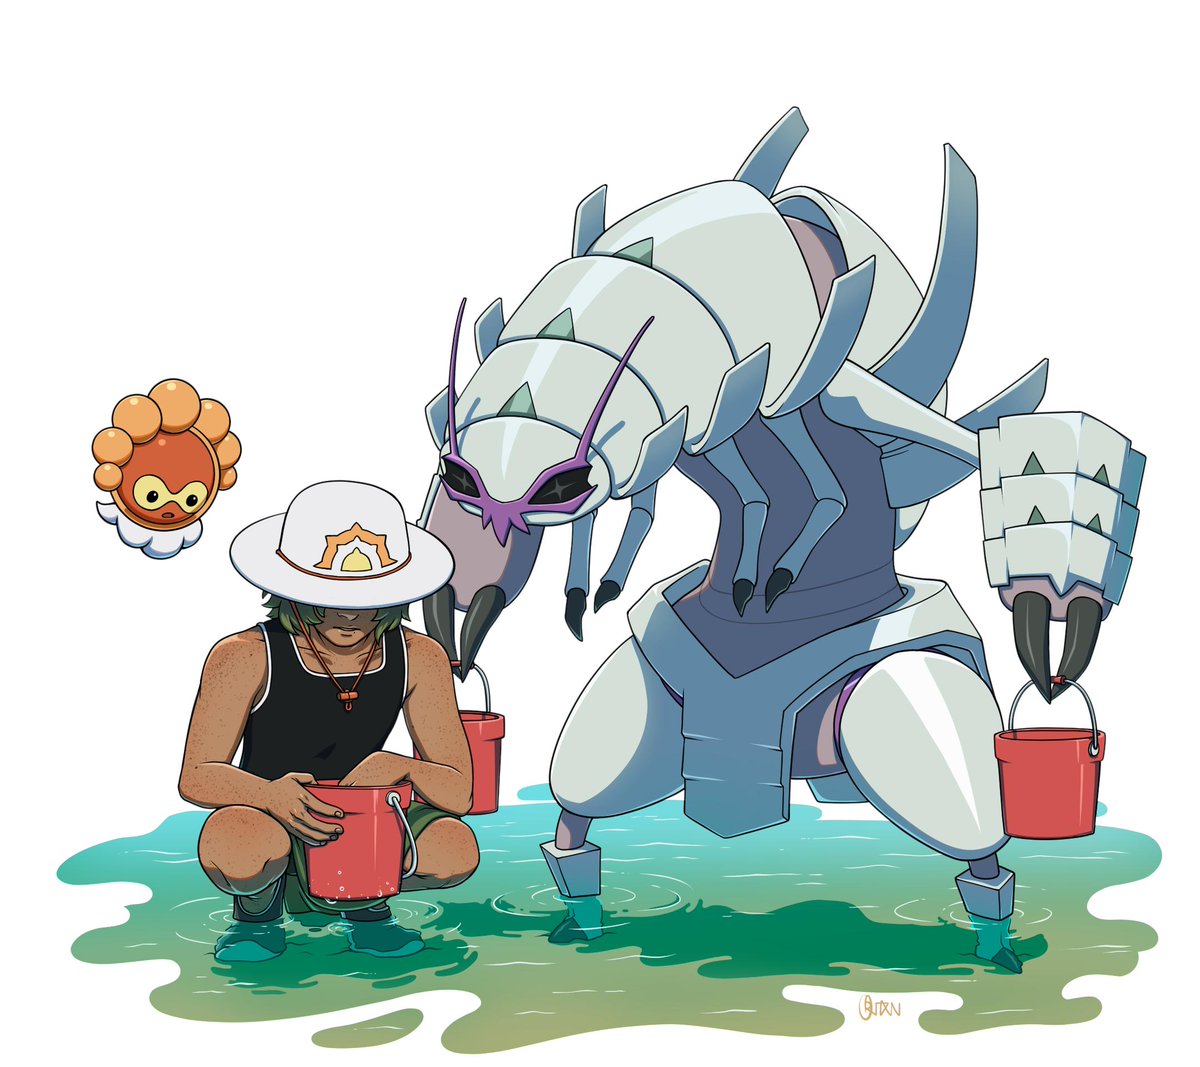 A full-color drawing of my Pokemon character, a Sunny form Castform, and a Golisopod...